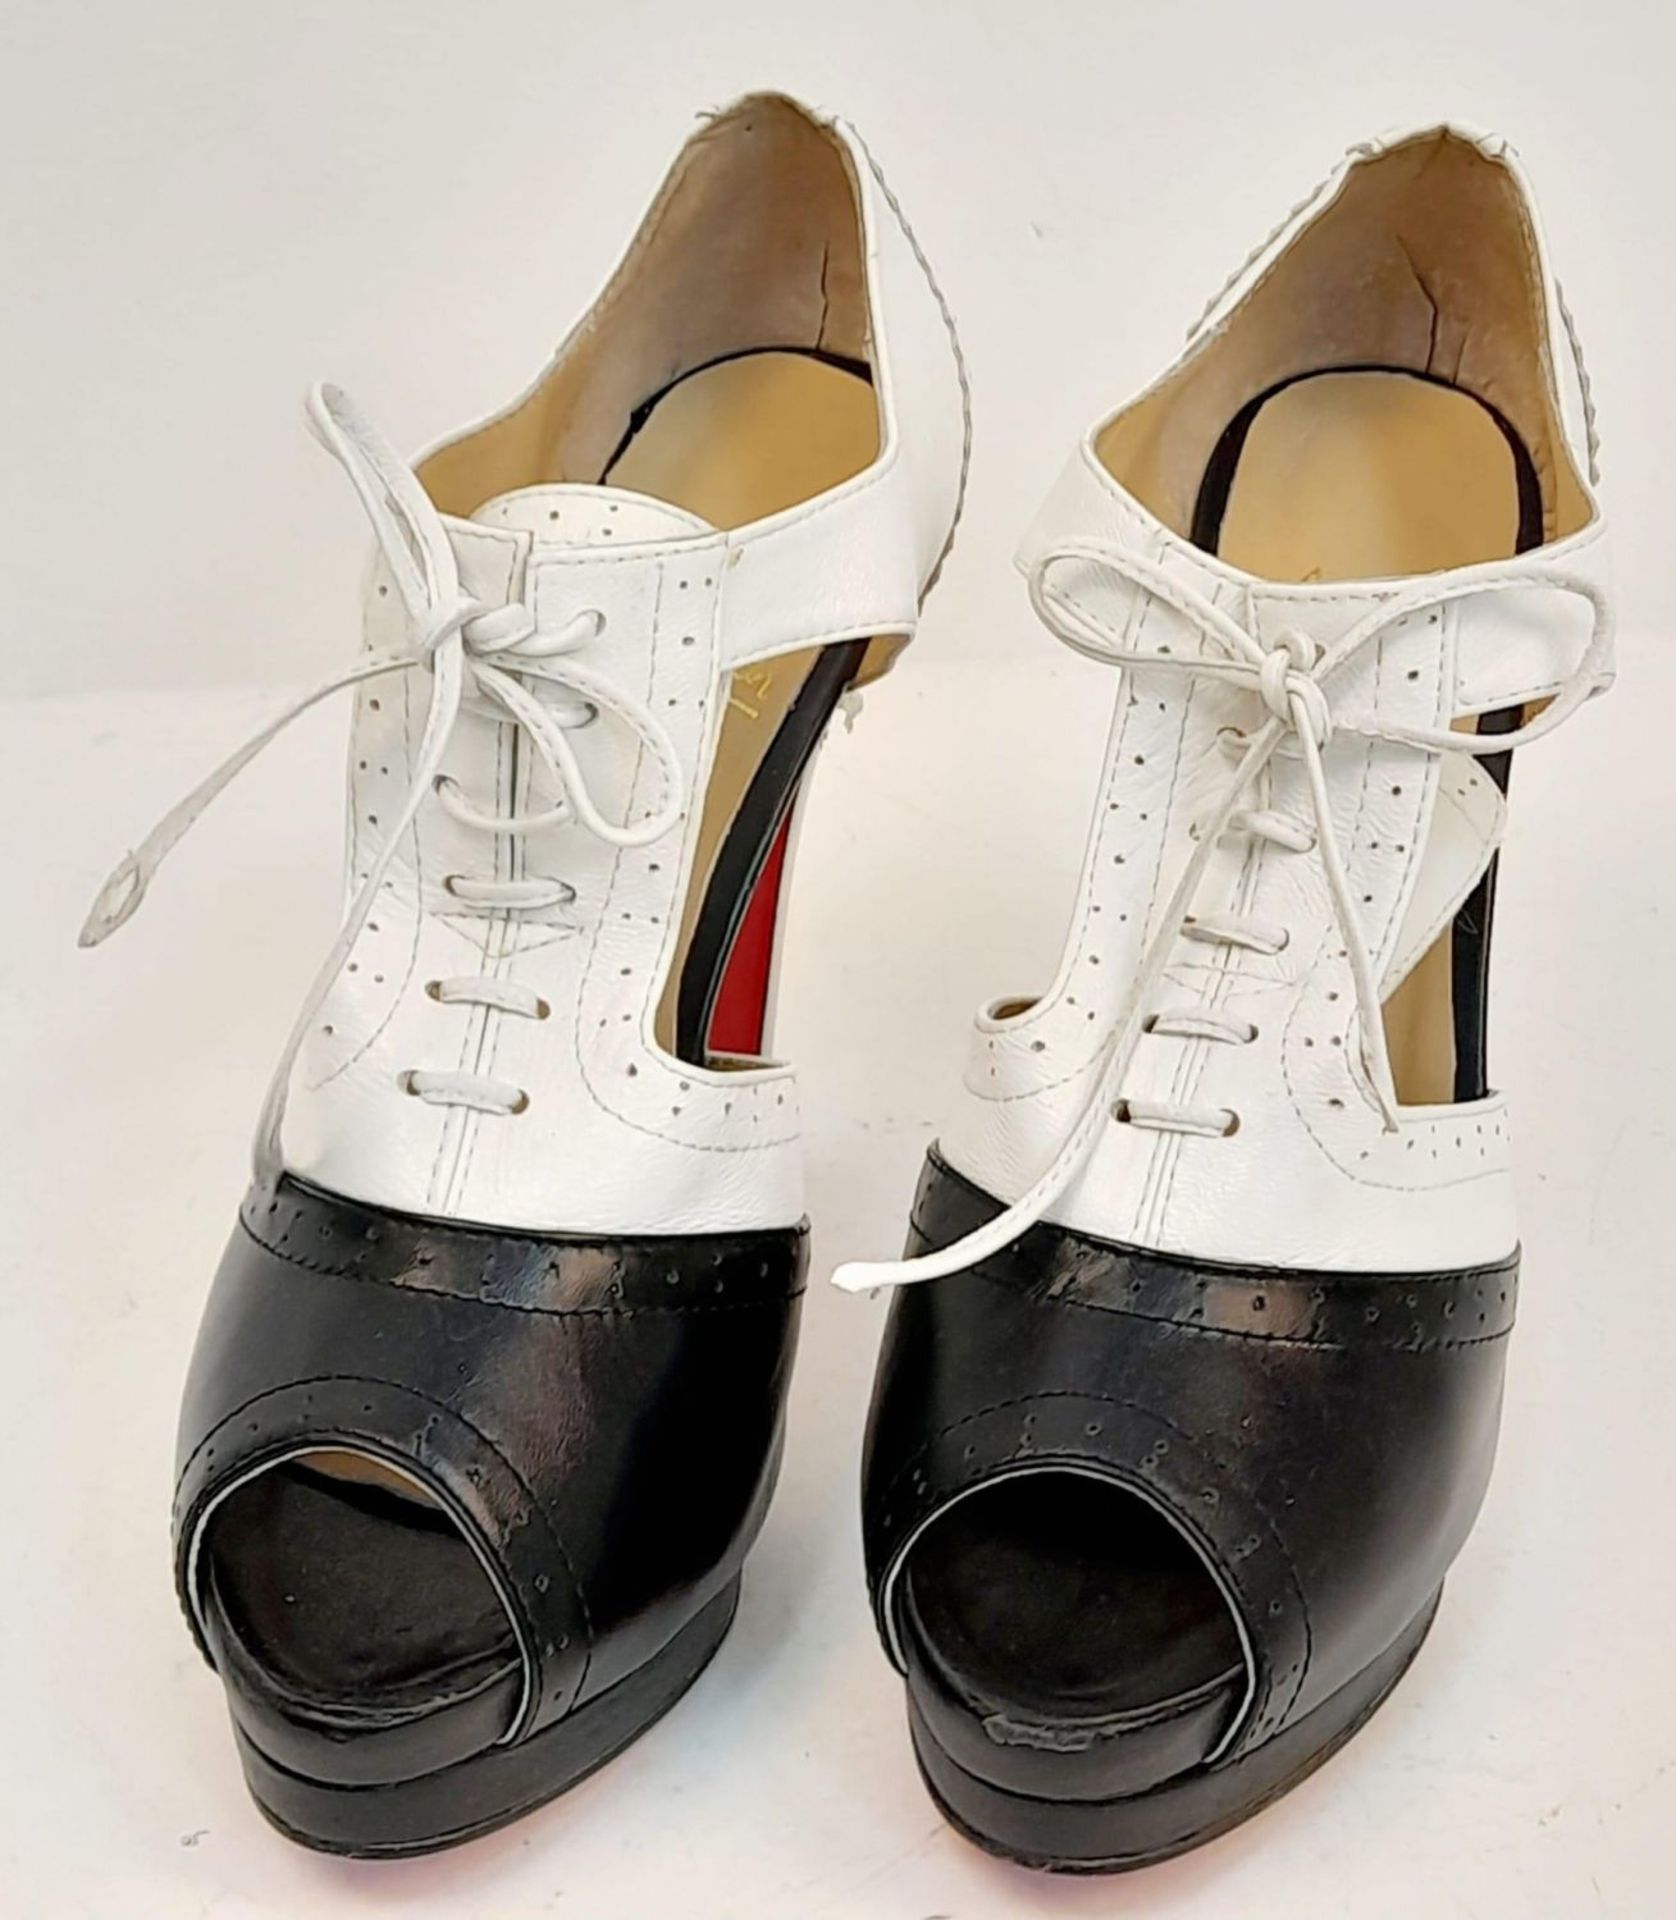 A Pair of Louboutin high heels in black and white leather. Lightly used. Size 40. - Image 3 of 10